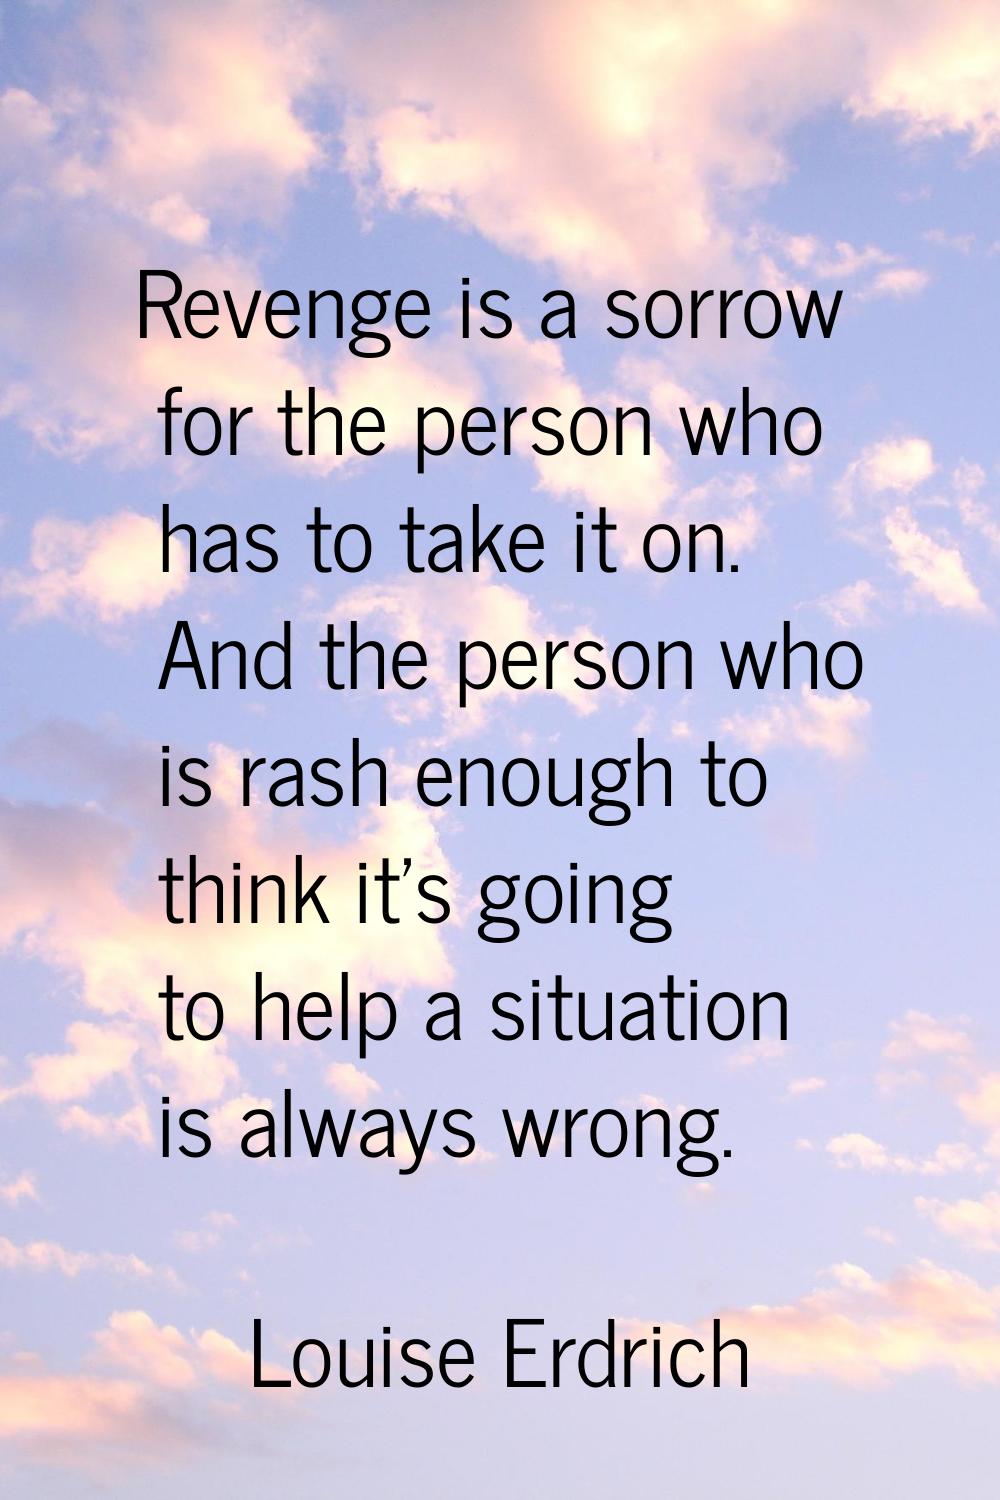 Revenge is a sorrow for the person who has to take it on. And the person who is rash enough to thin